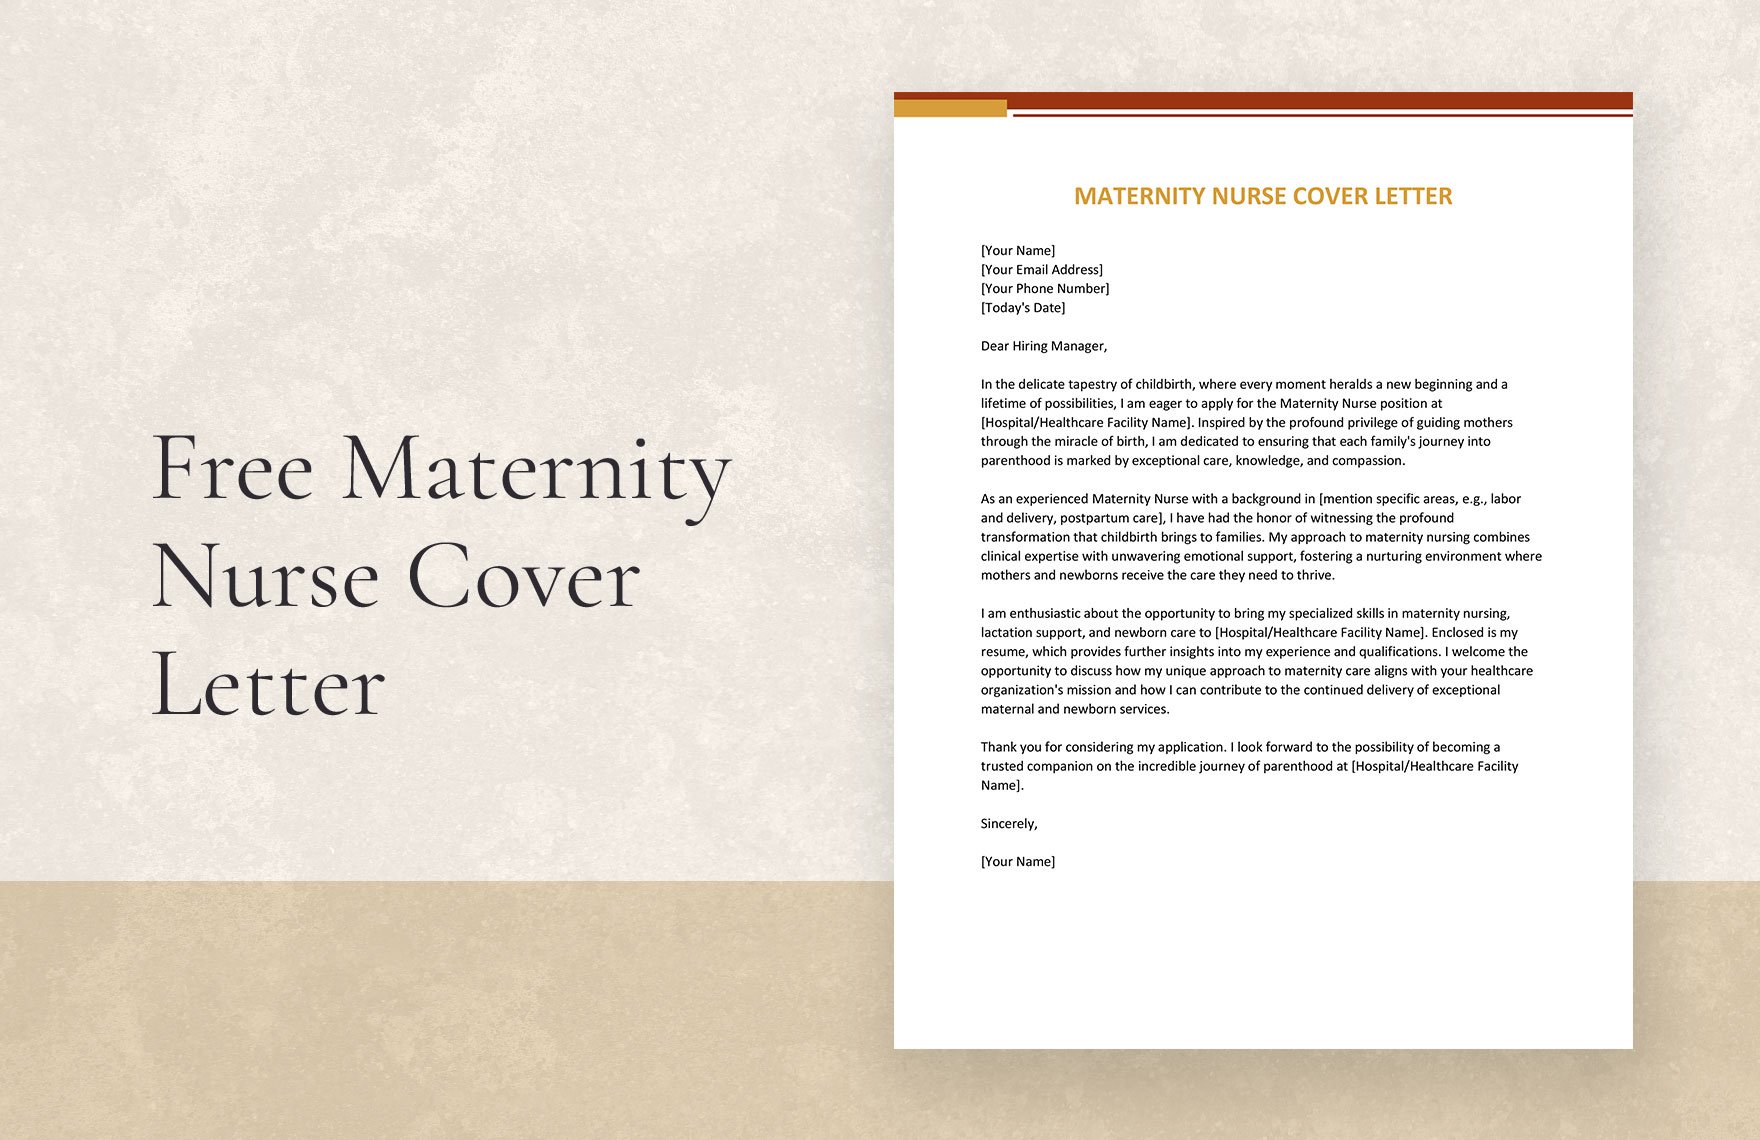 Maternity Nurse Cover Letter in Word, Google Docs